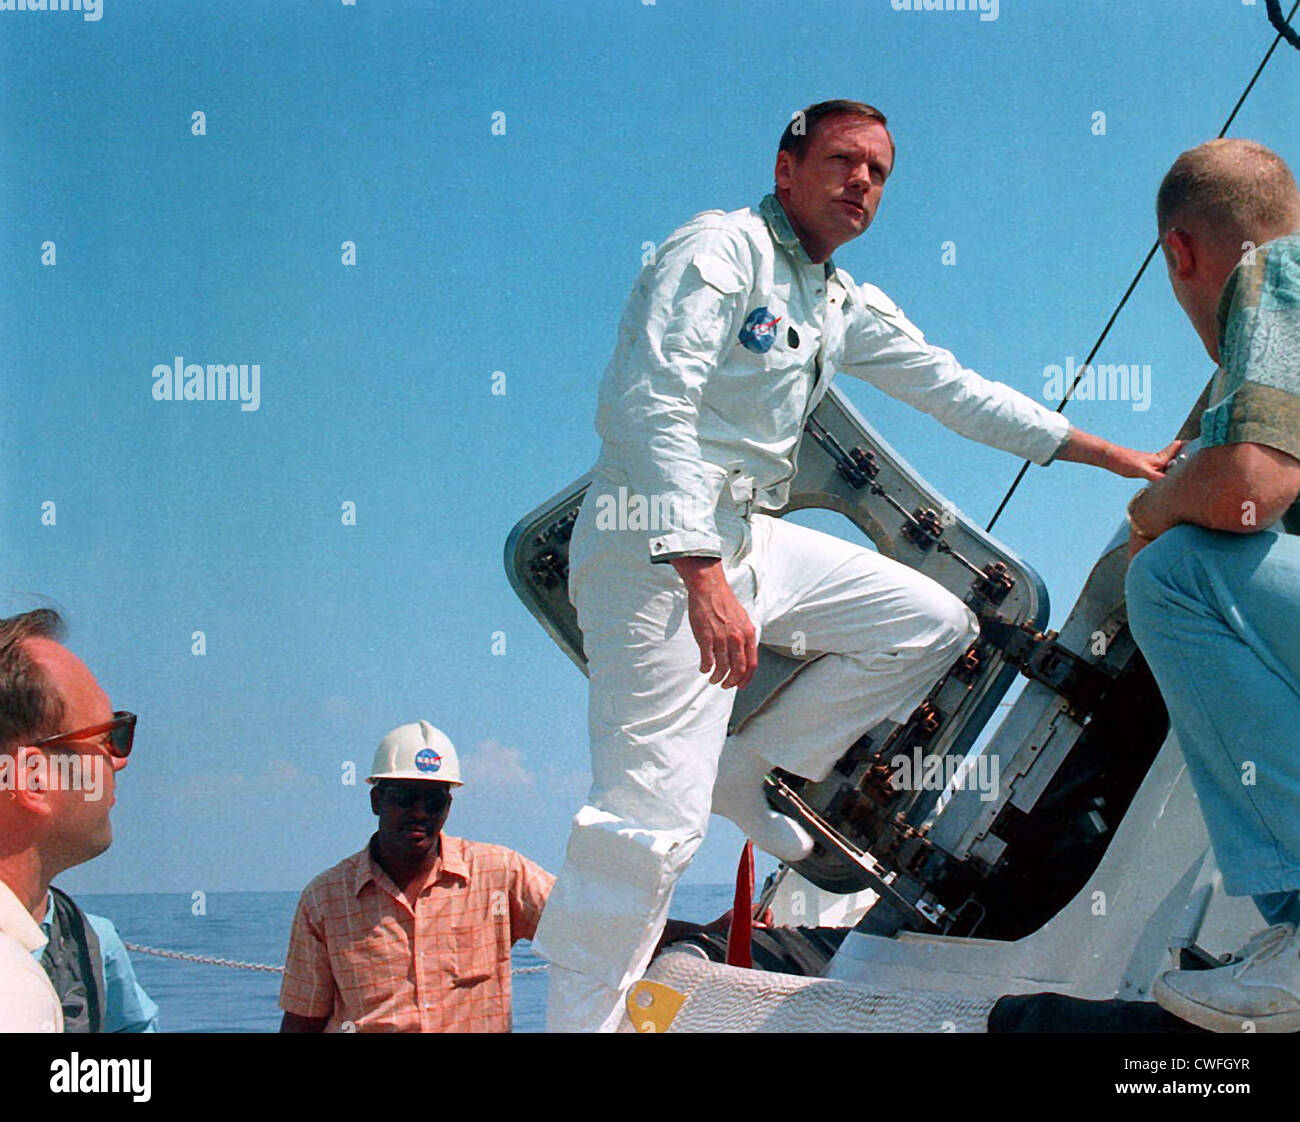 NASA Astronaut Neil Armstrong on the deck of the NASA Motor Vessel Retriever prior to participating in water egress training in the Gulf of Mexico May 24, 1969. Stock Photo